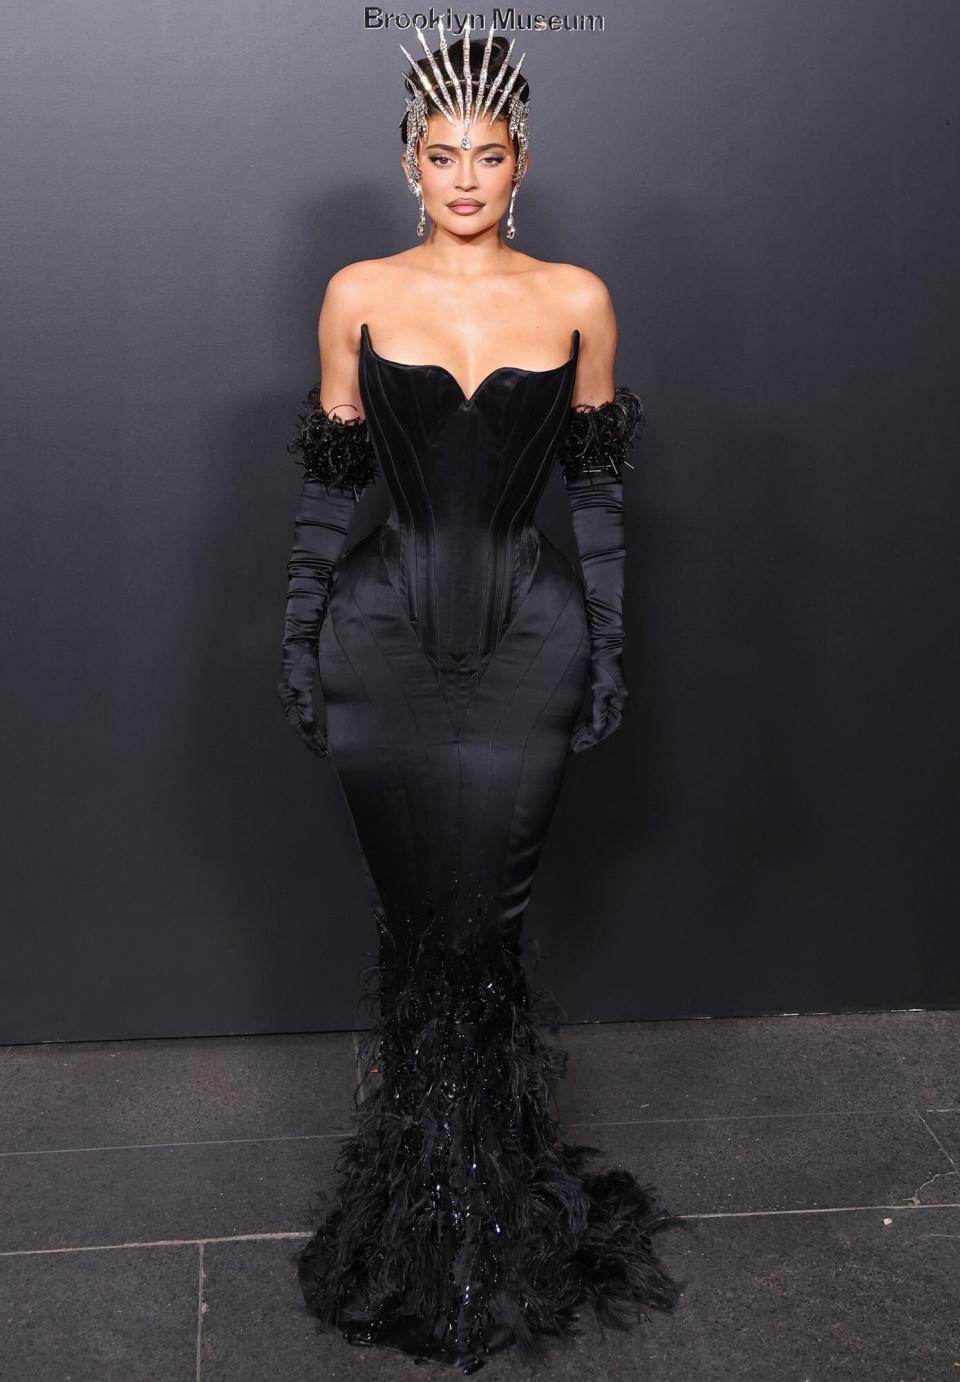 Kylie Jenner attends the Thierry Mugler: Couturissime exhibition opening night at Brooklyn Museum